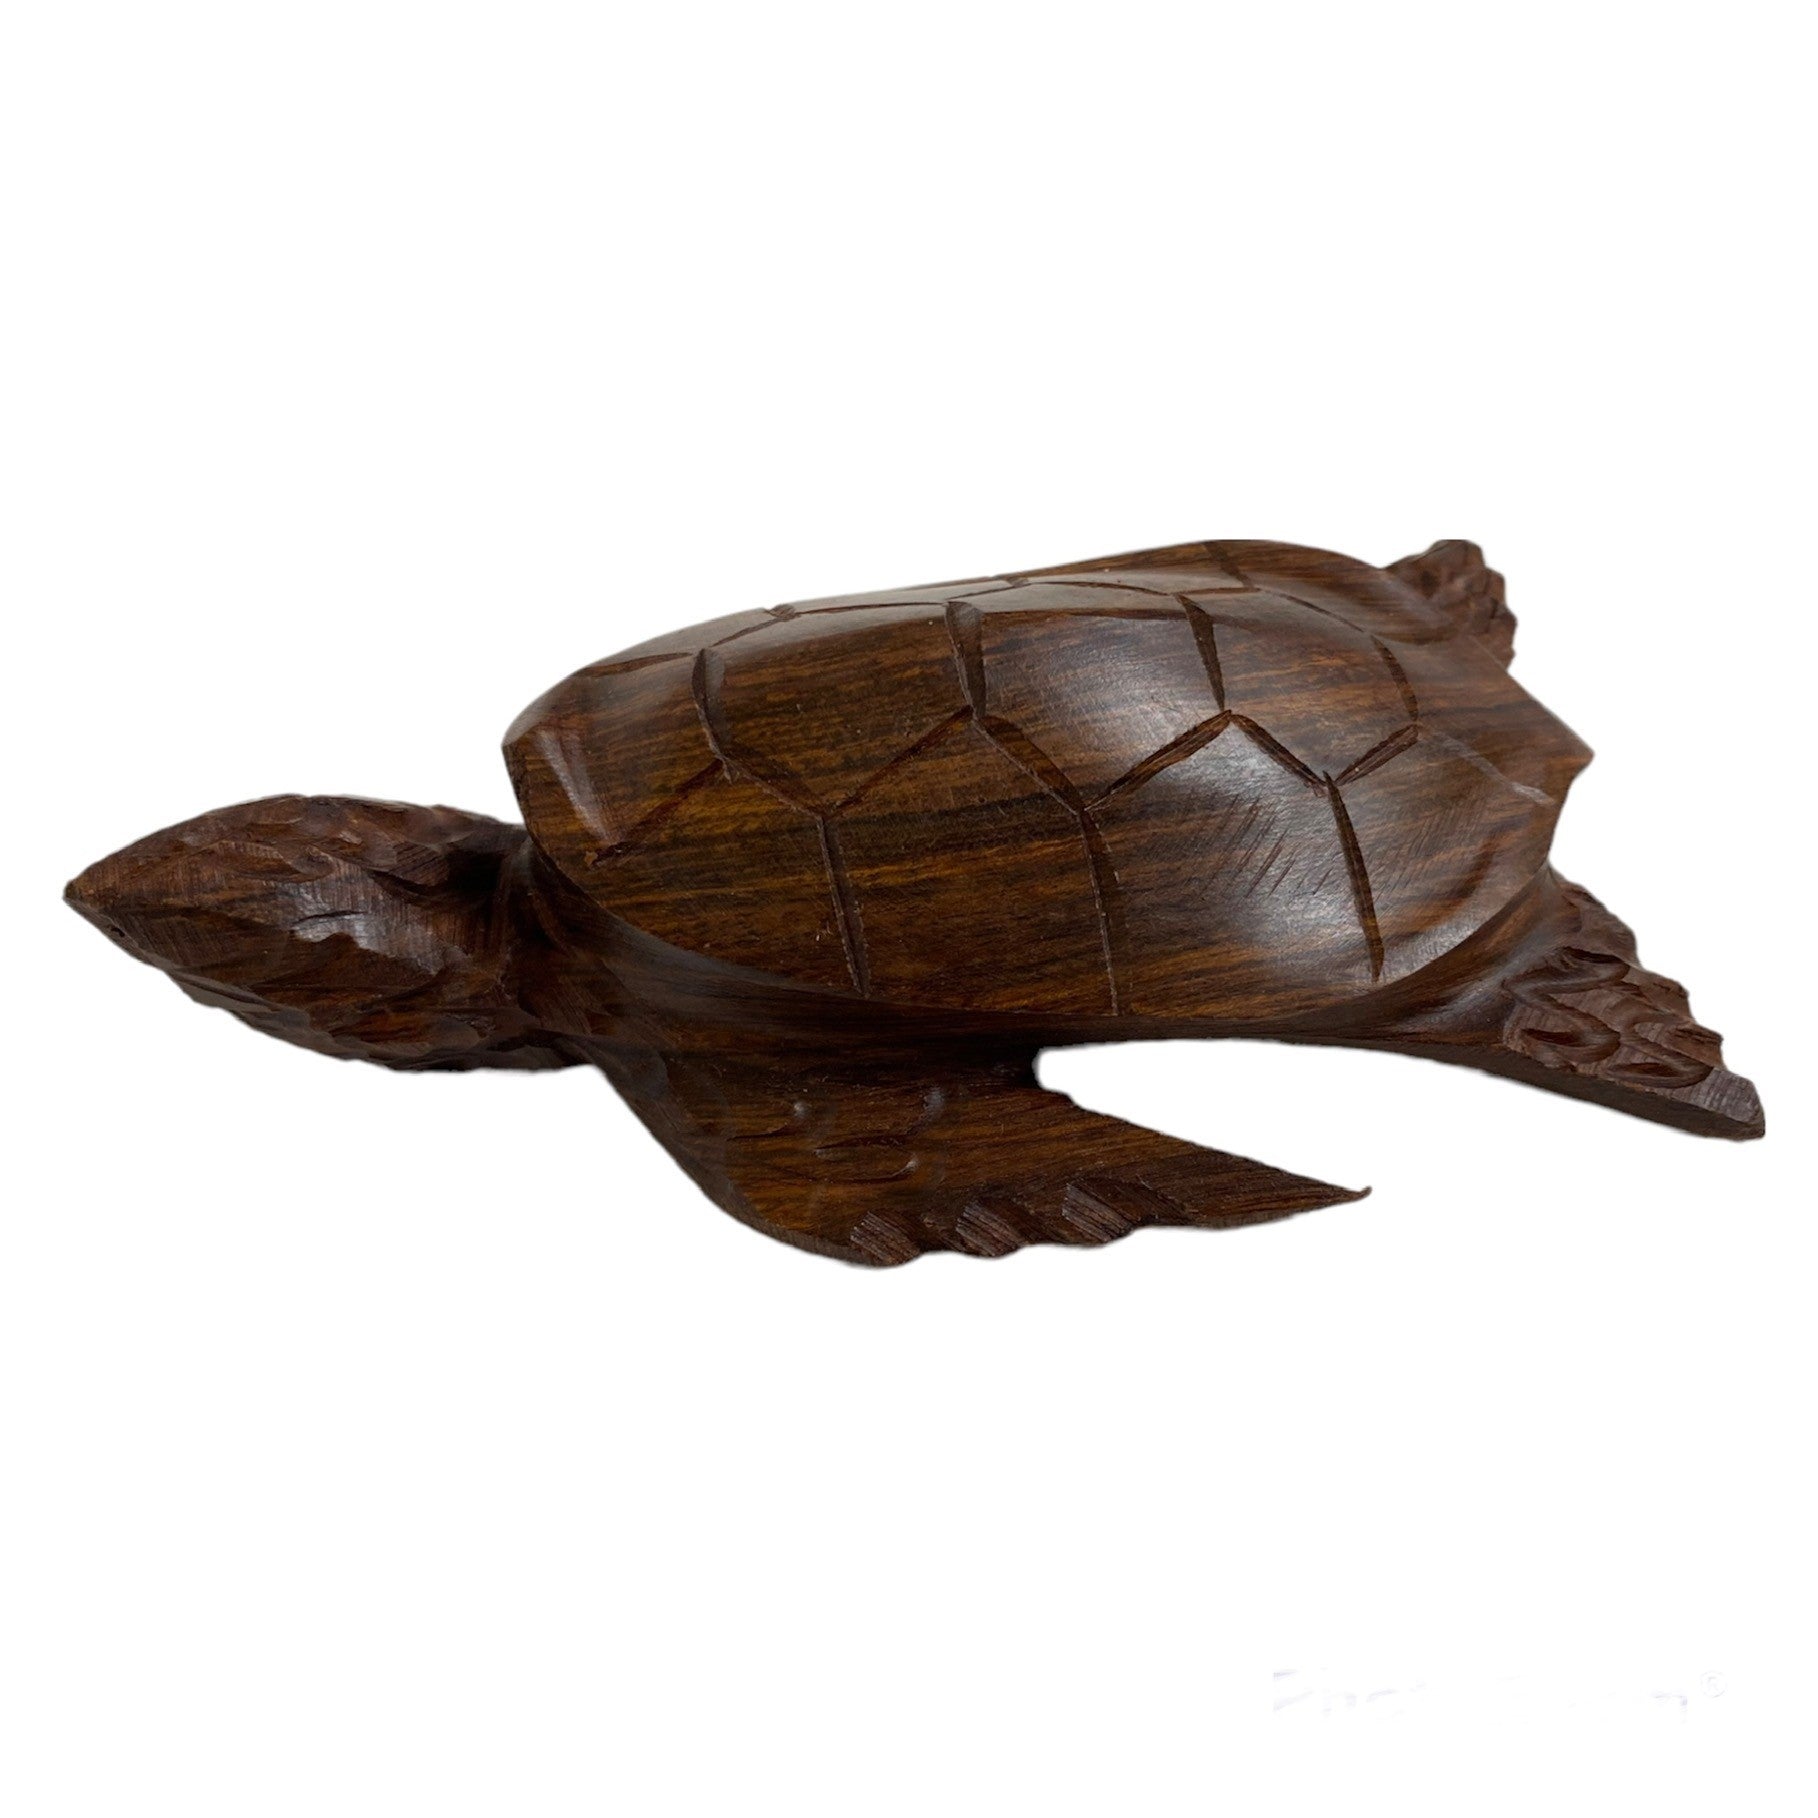 Ironwood Sea Turtle made in Mexico Turtle Figurine Wood Carving 6.5’, 5 - Tobmarc Home Decor & Gifts 